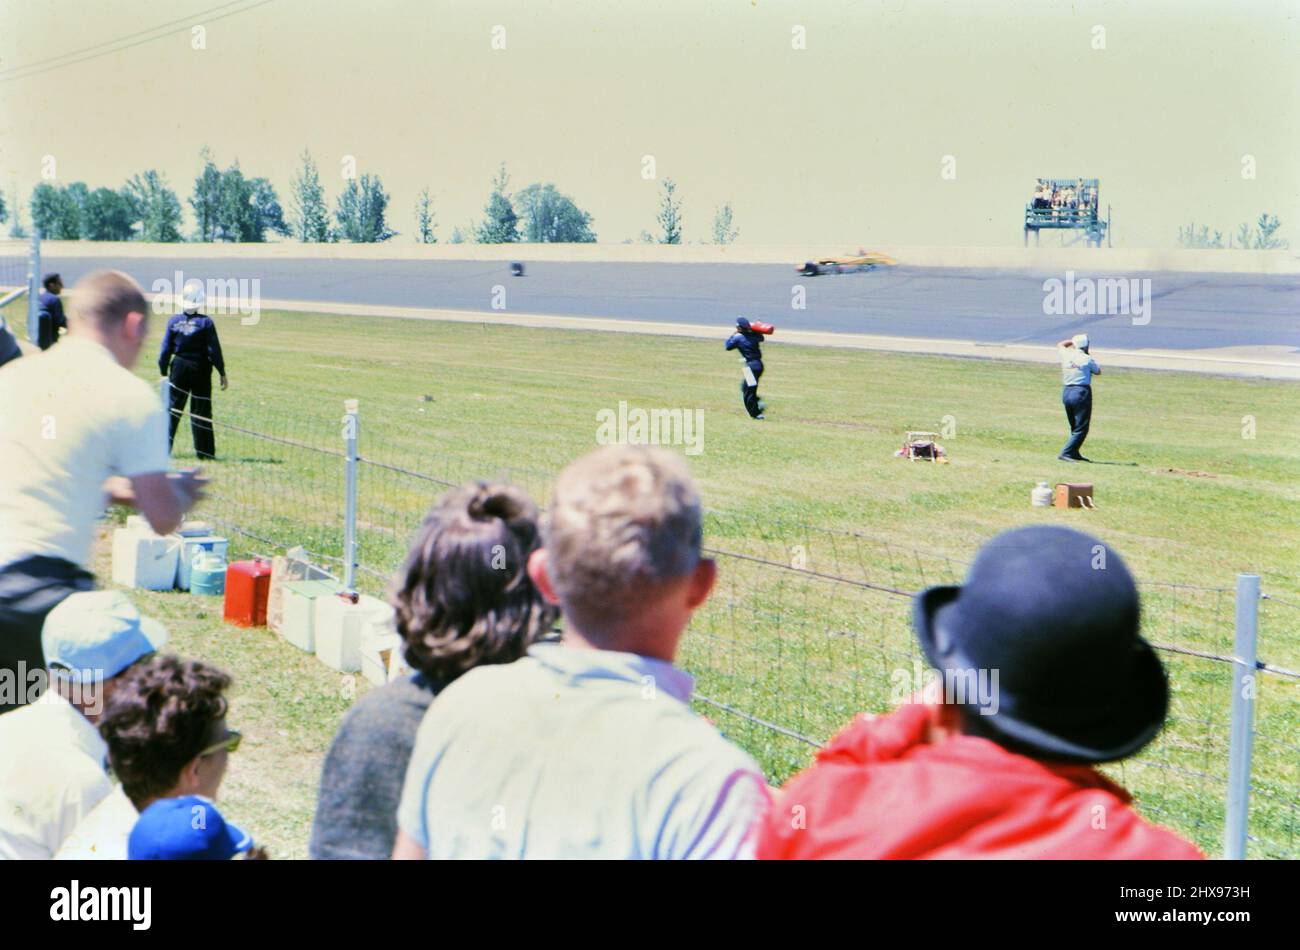 The 1963 Indianapolis 500 race from the race track infield, rescue crew going to attened to a wrecked car on the track ca. 1963 Stock Photo